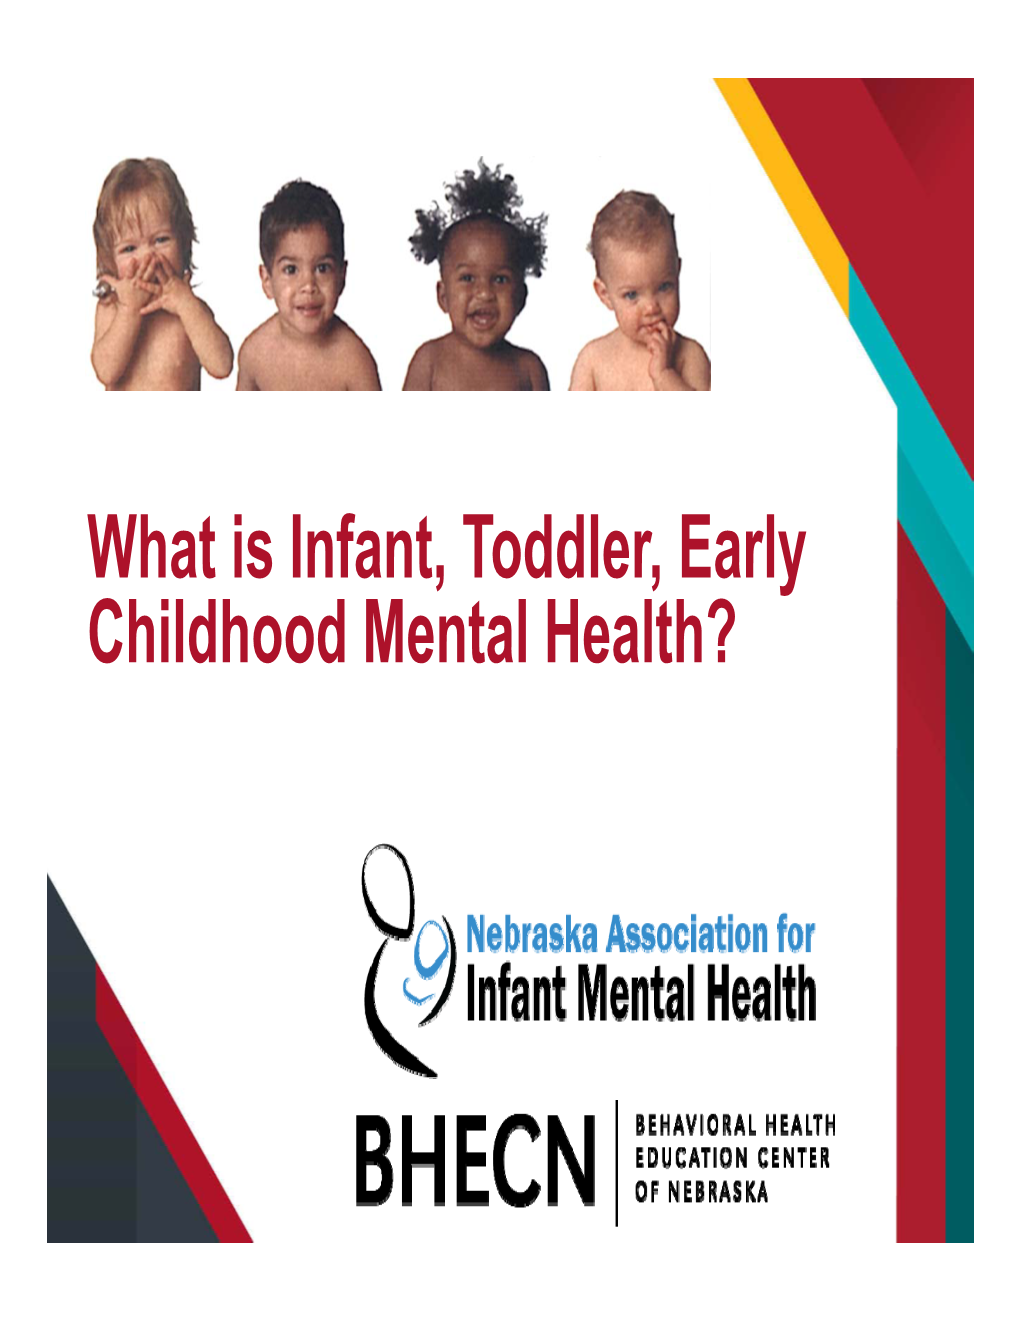 What Is Infant, Toddler, Early Childhood Mental Health? About BHECN